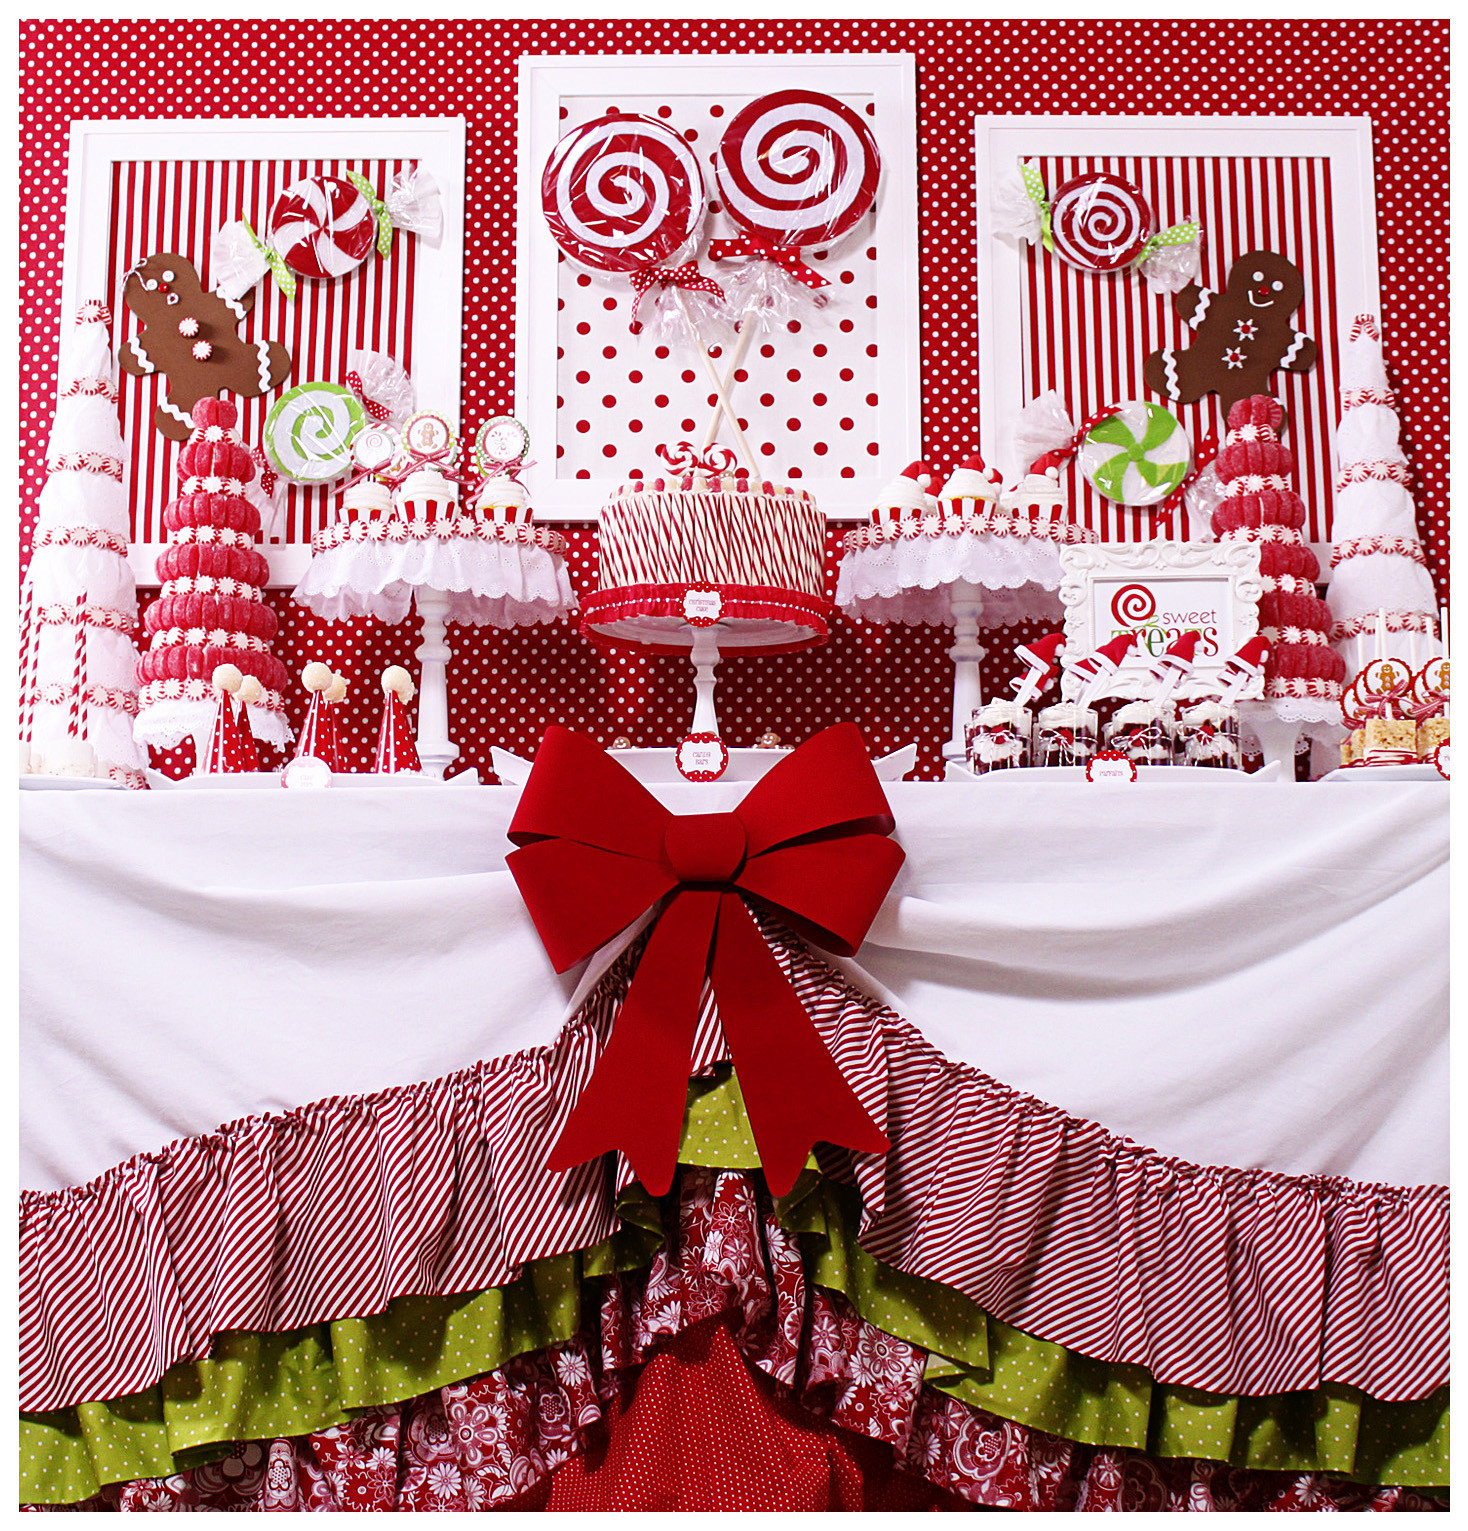 Christmas Candy Pictures
 Amanda s Parties To Go Candy Christmas Dessert Table